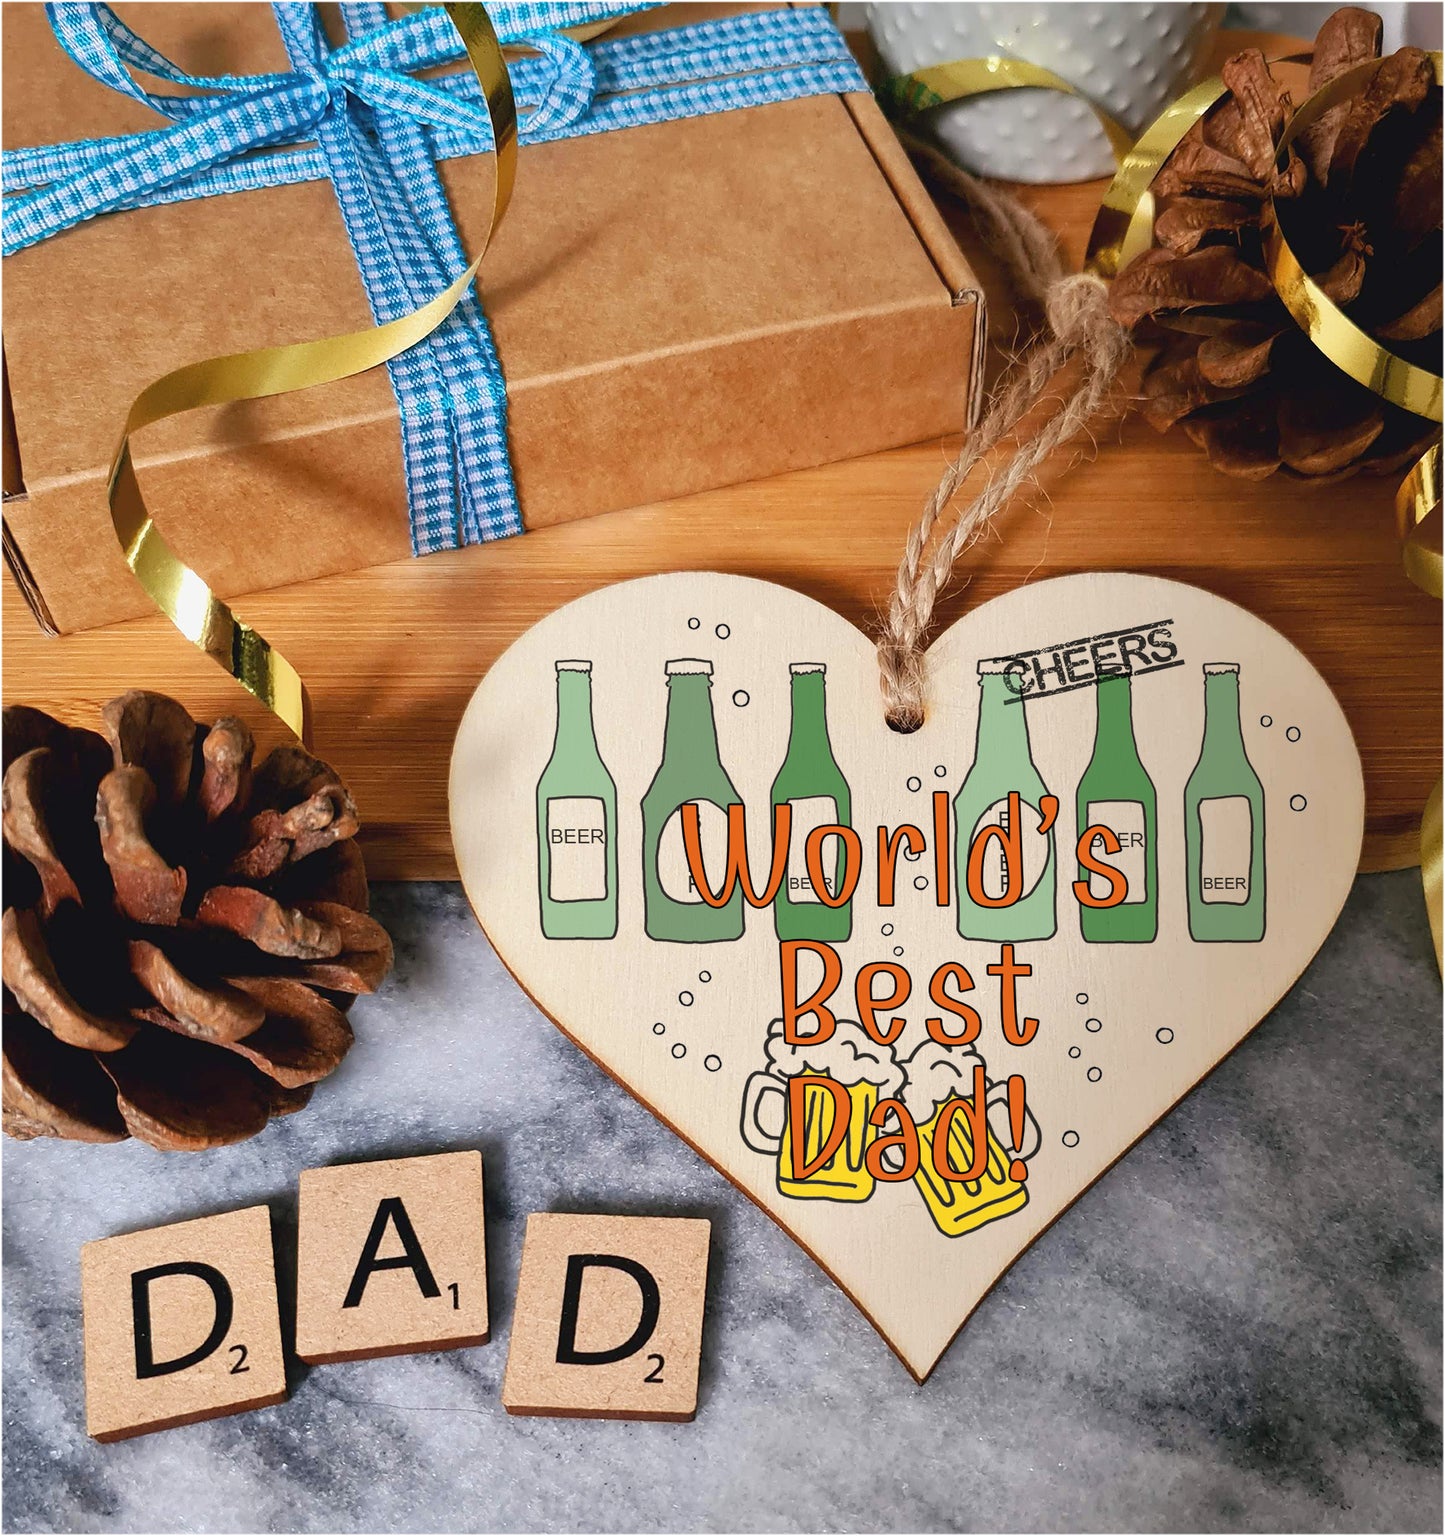 Handmade Wooden Hanging Heart Plaque Gift for Dad this Fathers Day Novelty Fun Thoughtful Keepsake for Beer Fan